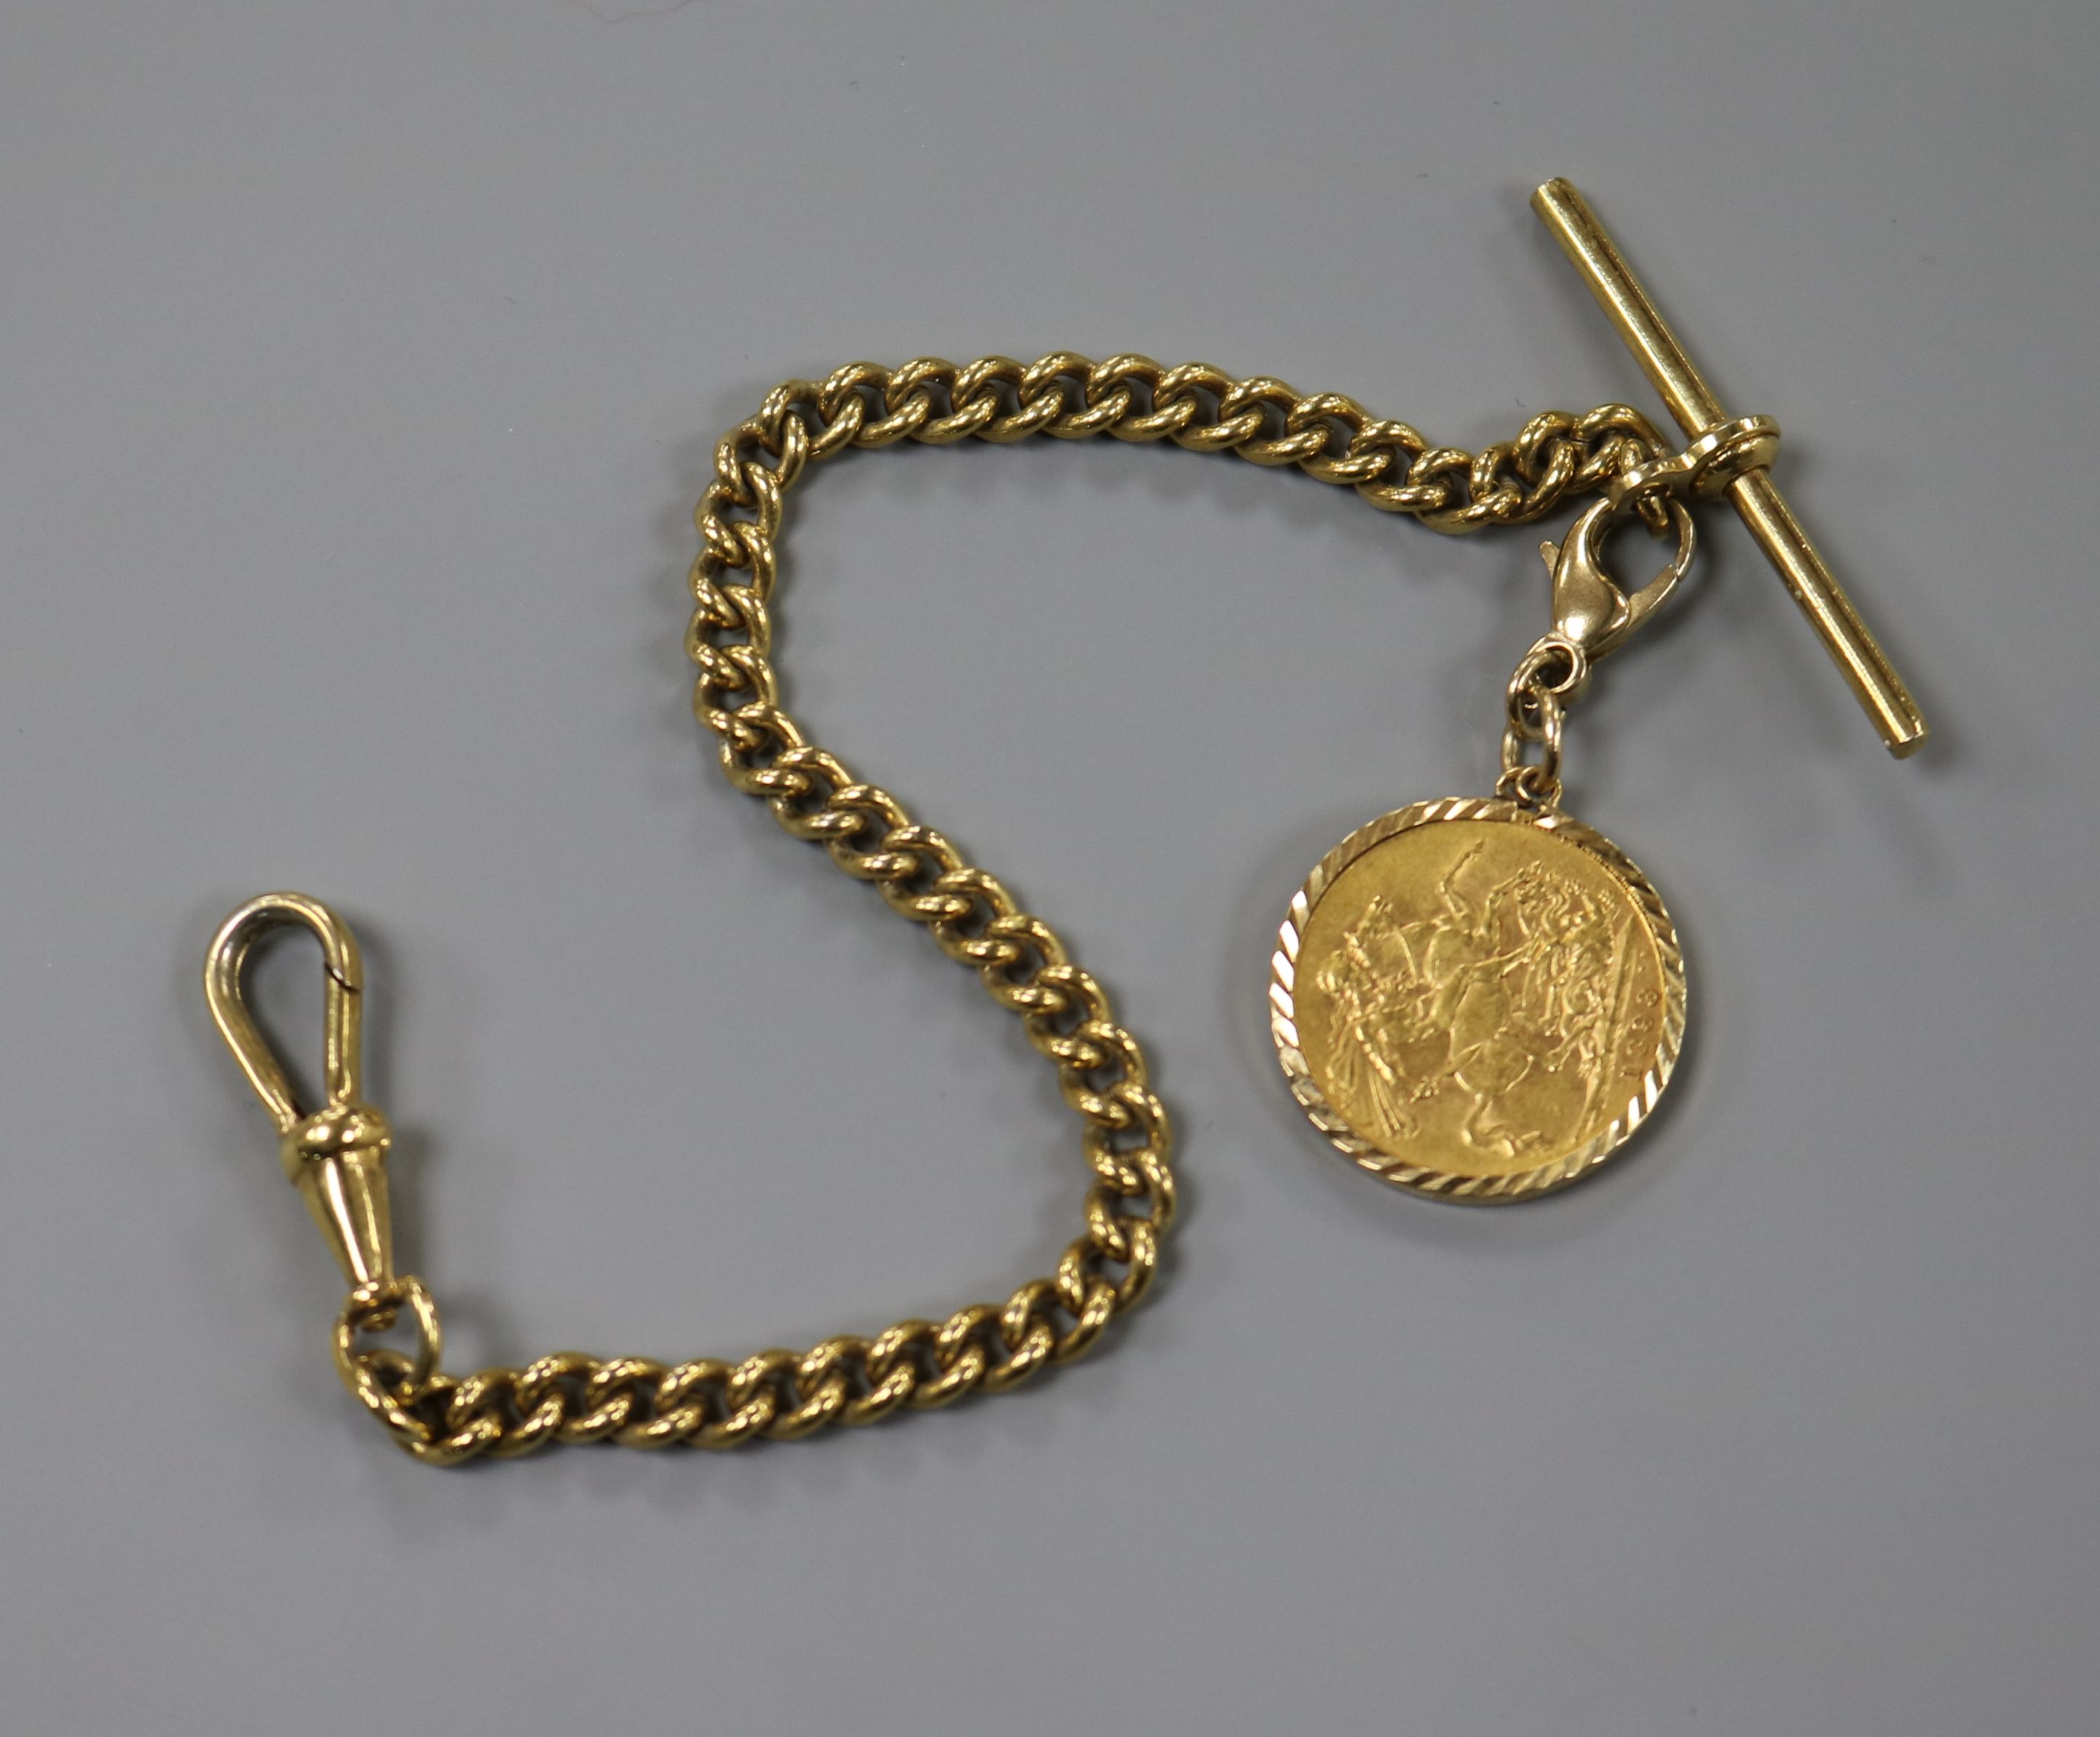 An 1893 gold sovereign in 9ct gold mount with trigger clasp (10.1g total) on a gilt metal metal